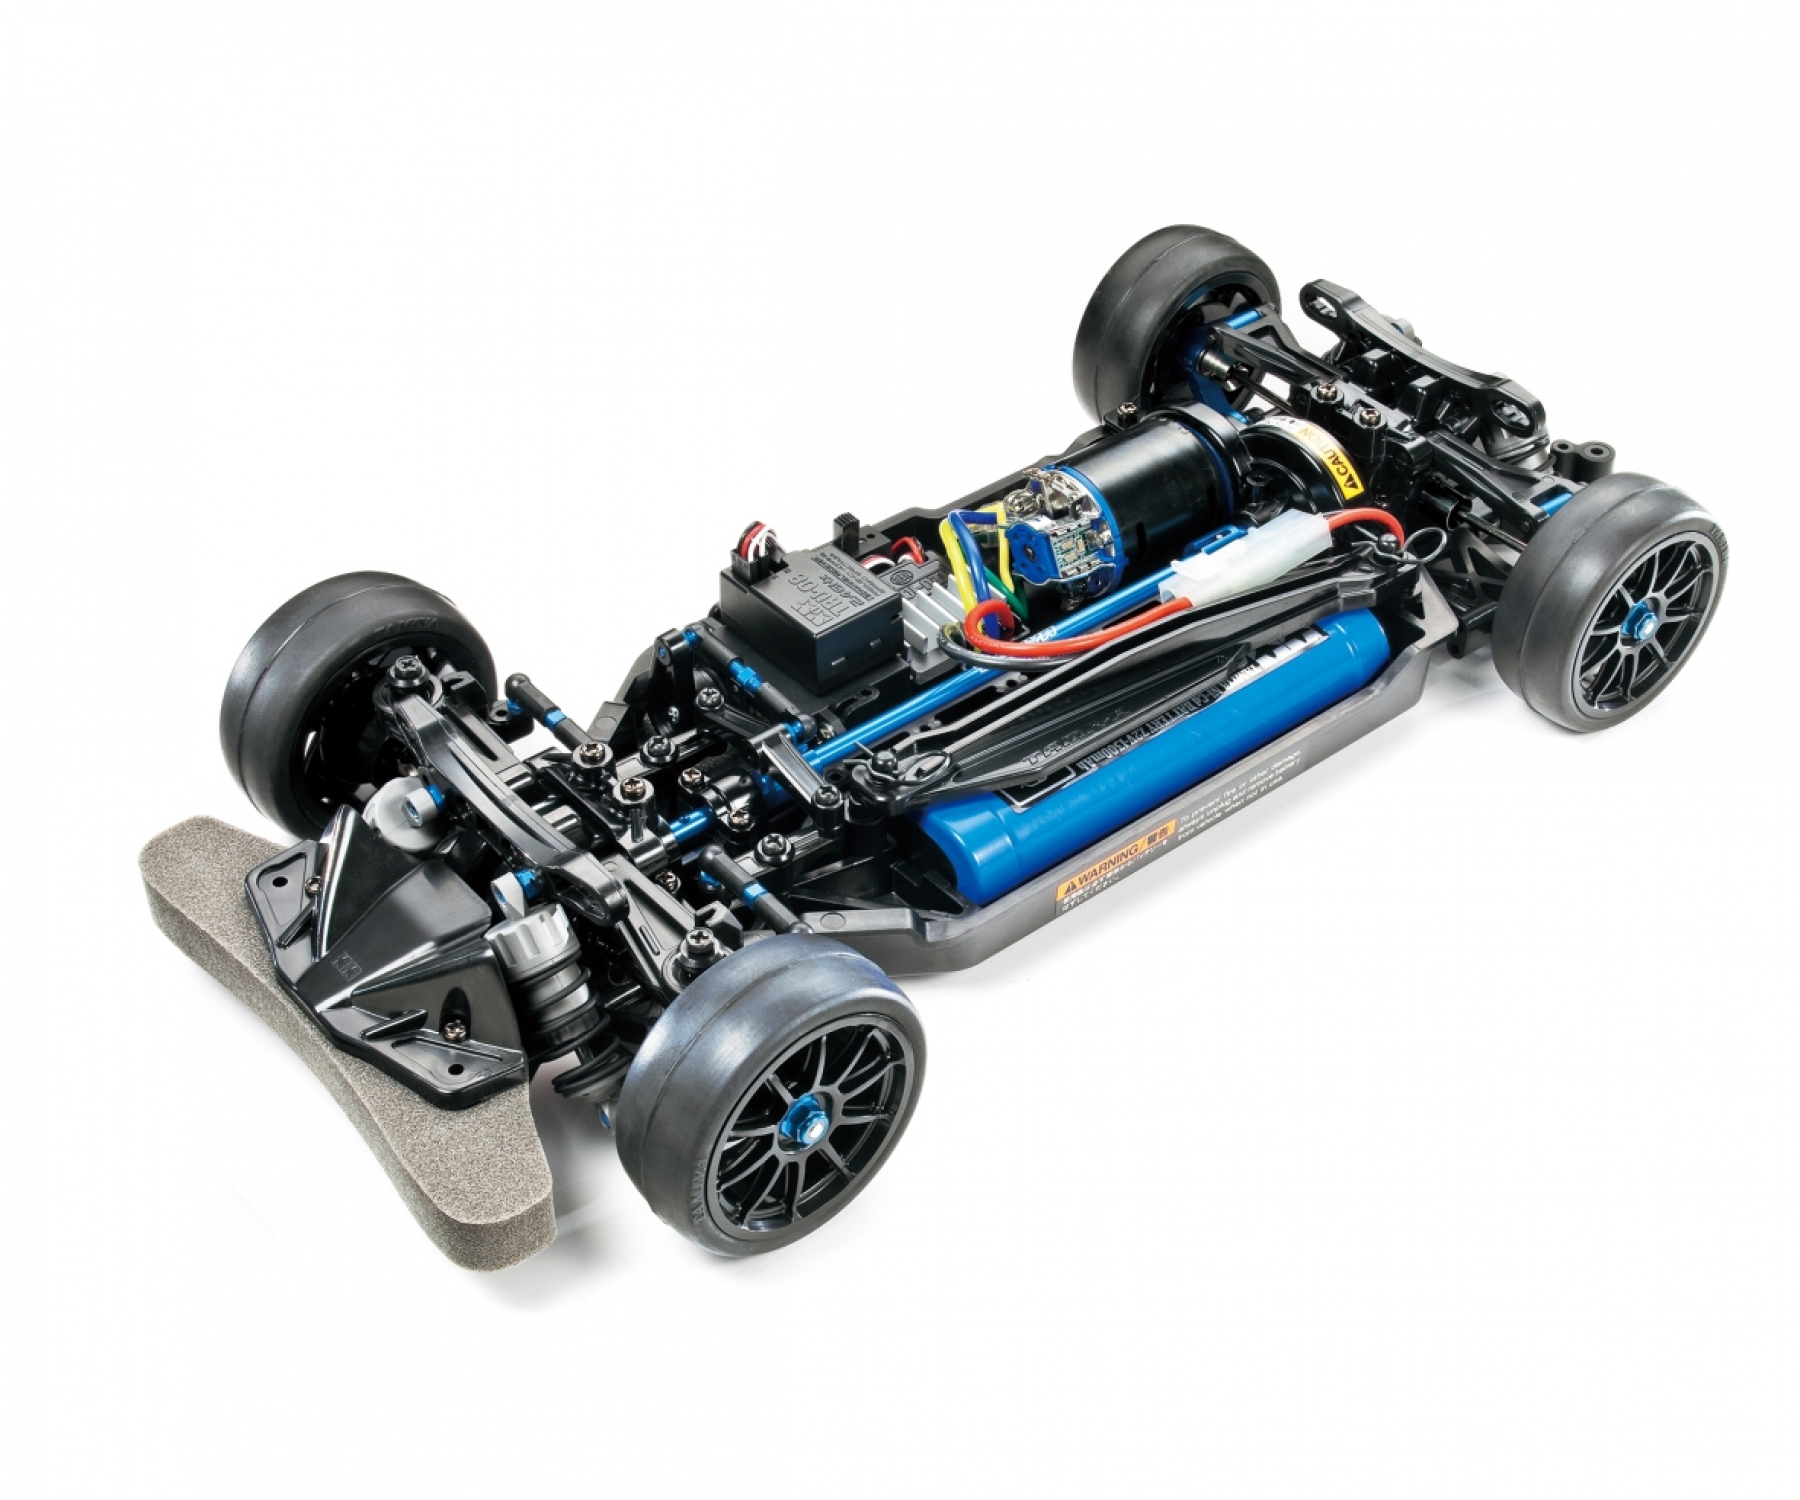 TT-02R Race Chassis Kit 1:10 Tuning 